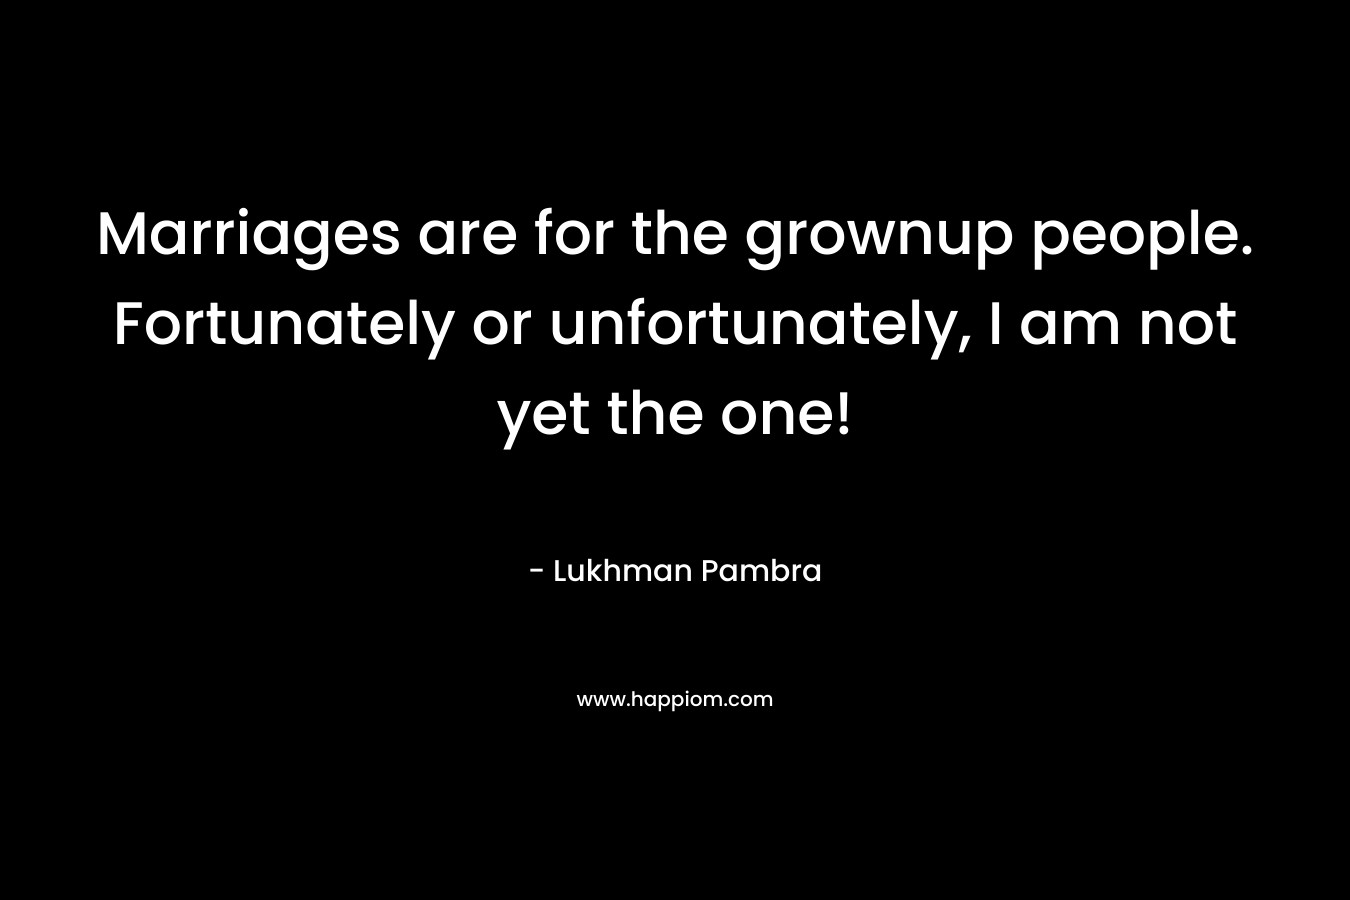 Marriages are for the grownup people. Fortunately or unfortunately, I am not yet the one! – Lukhman Pambra